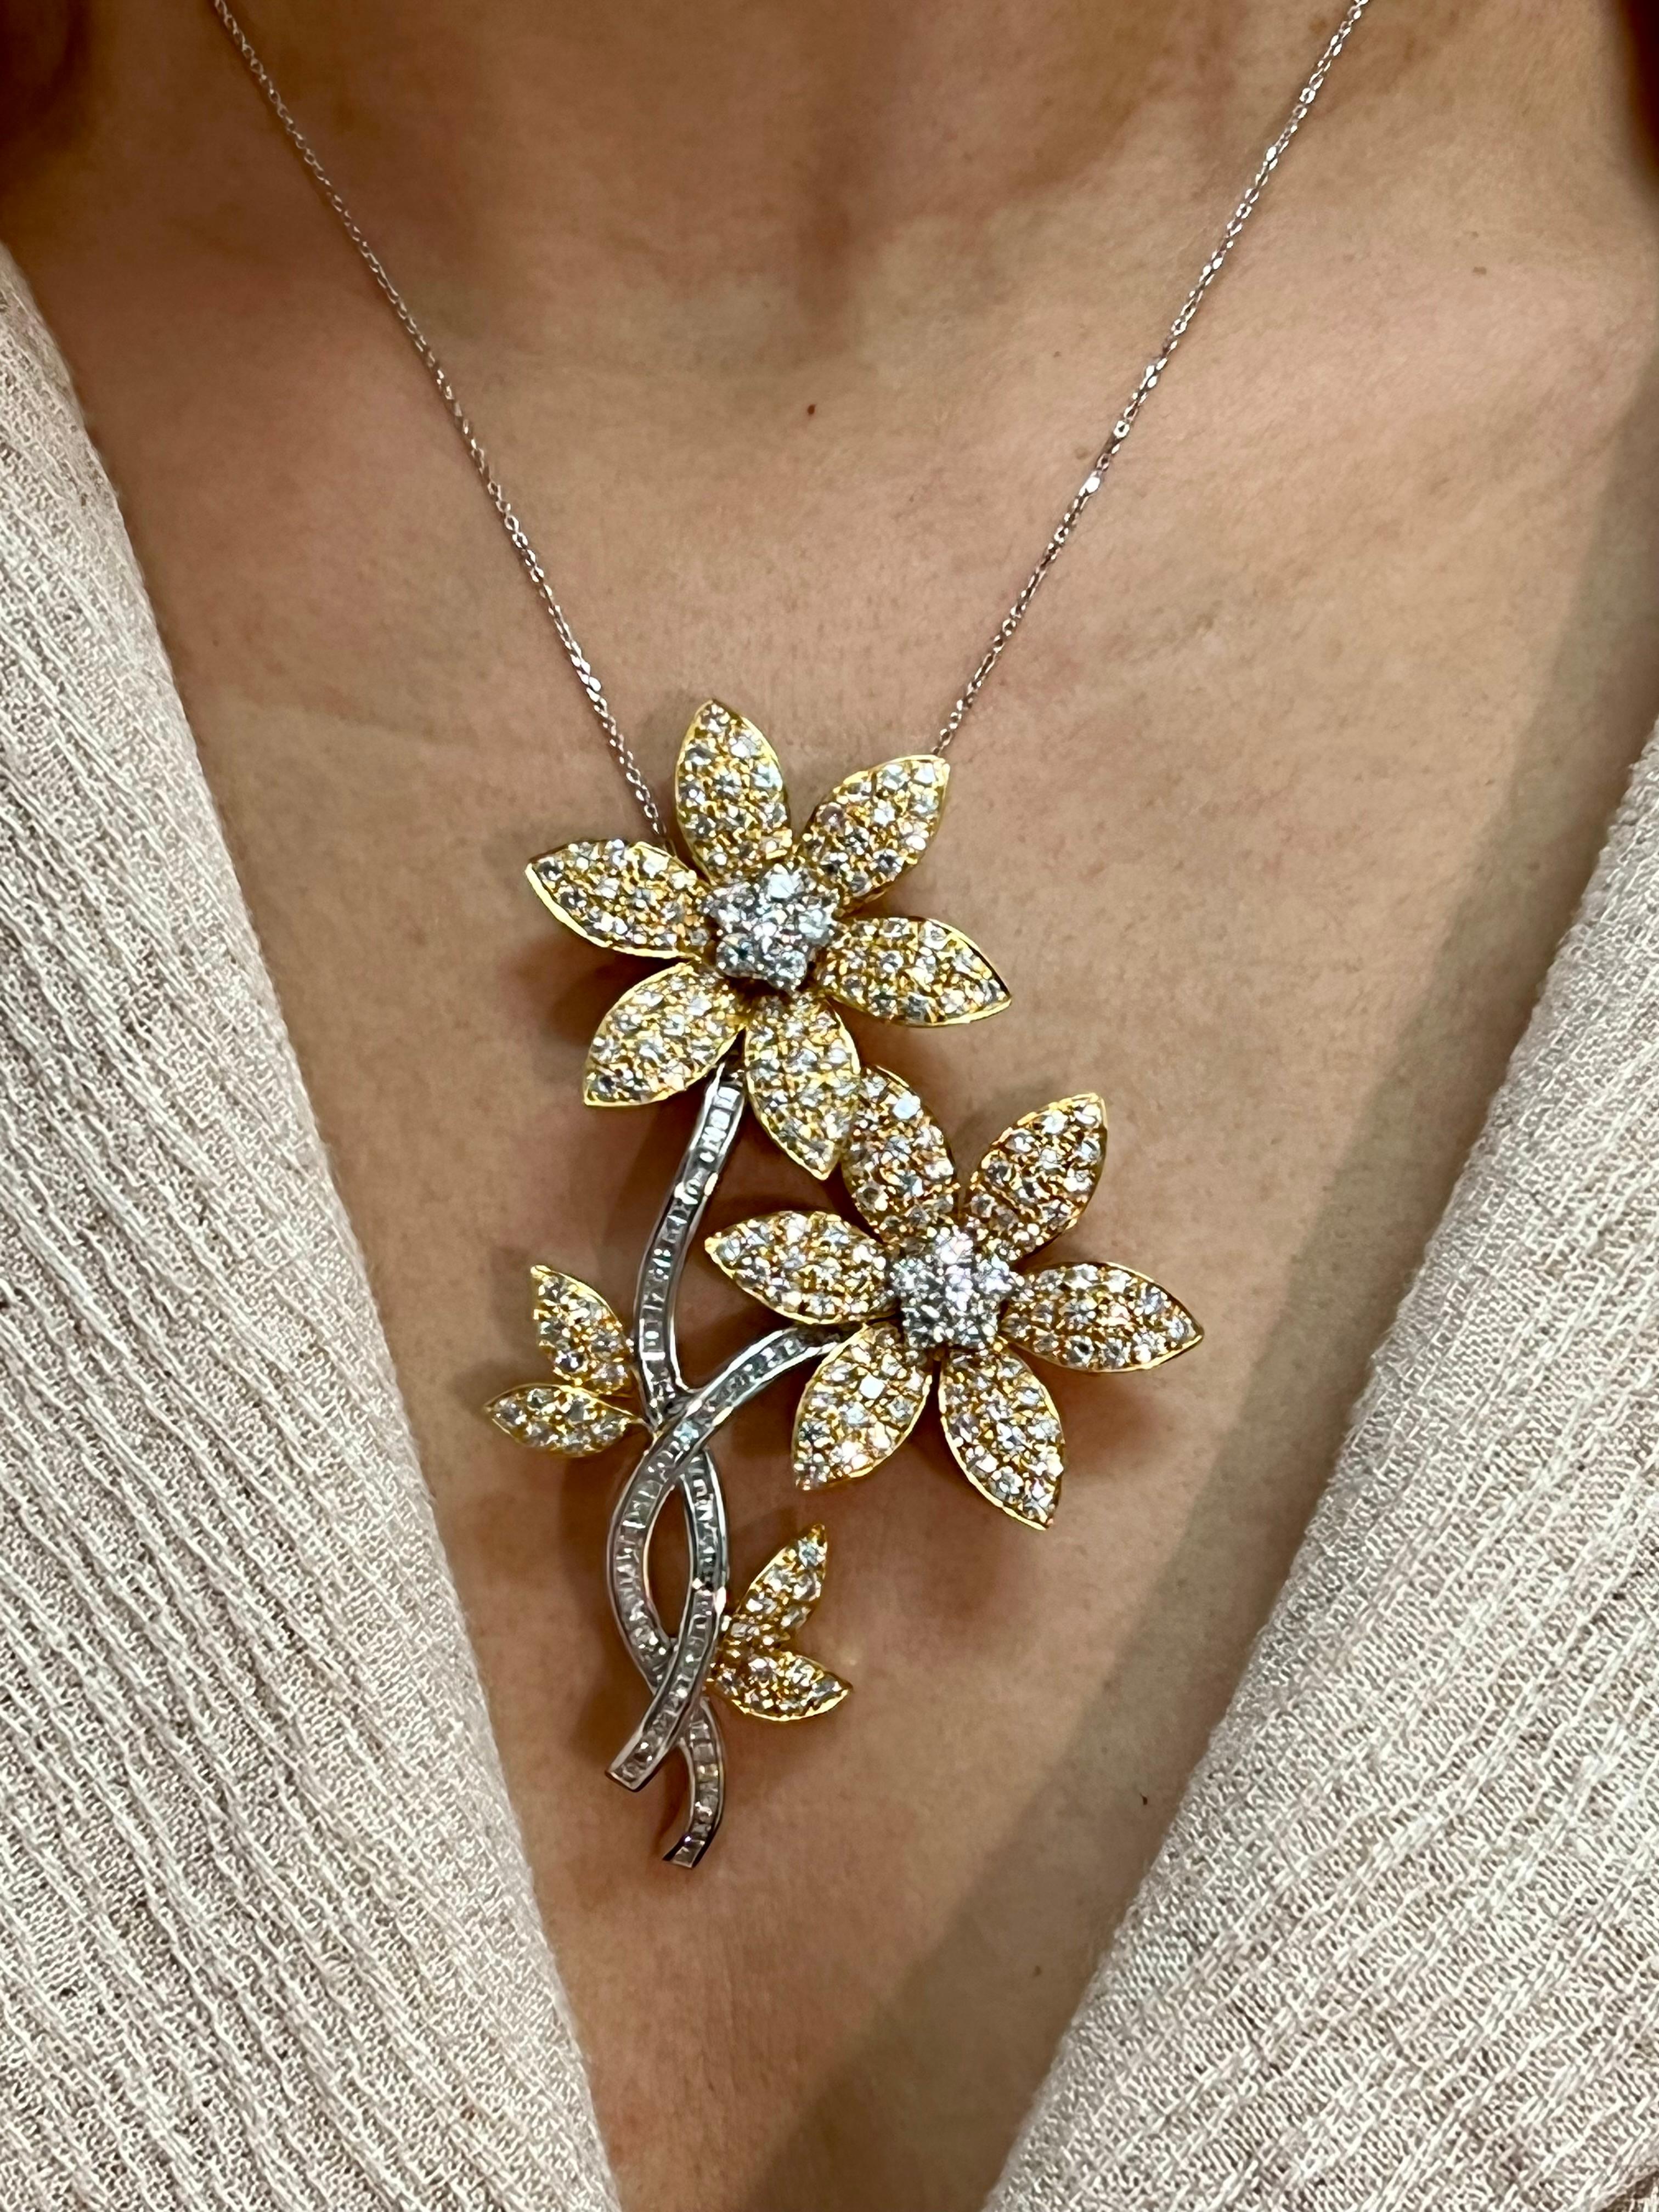 Please check out the HD video. This is a versatile piece of jewelry. You can wear is dressed up or down, as a brooch or as a pendant. The brooch pendant is made of 18k white and yellow gold and lots of diamonds. There are 64 square cut  white